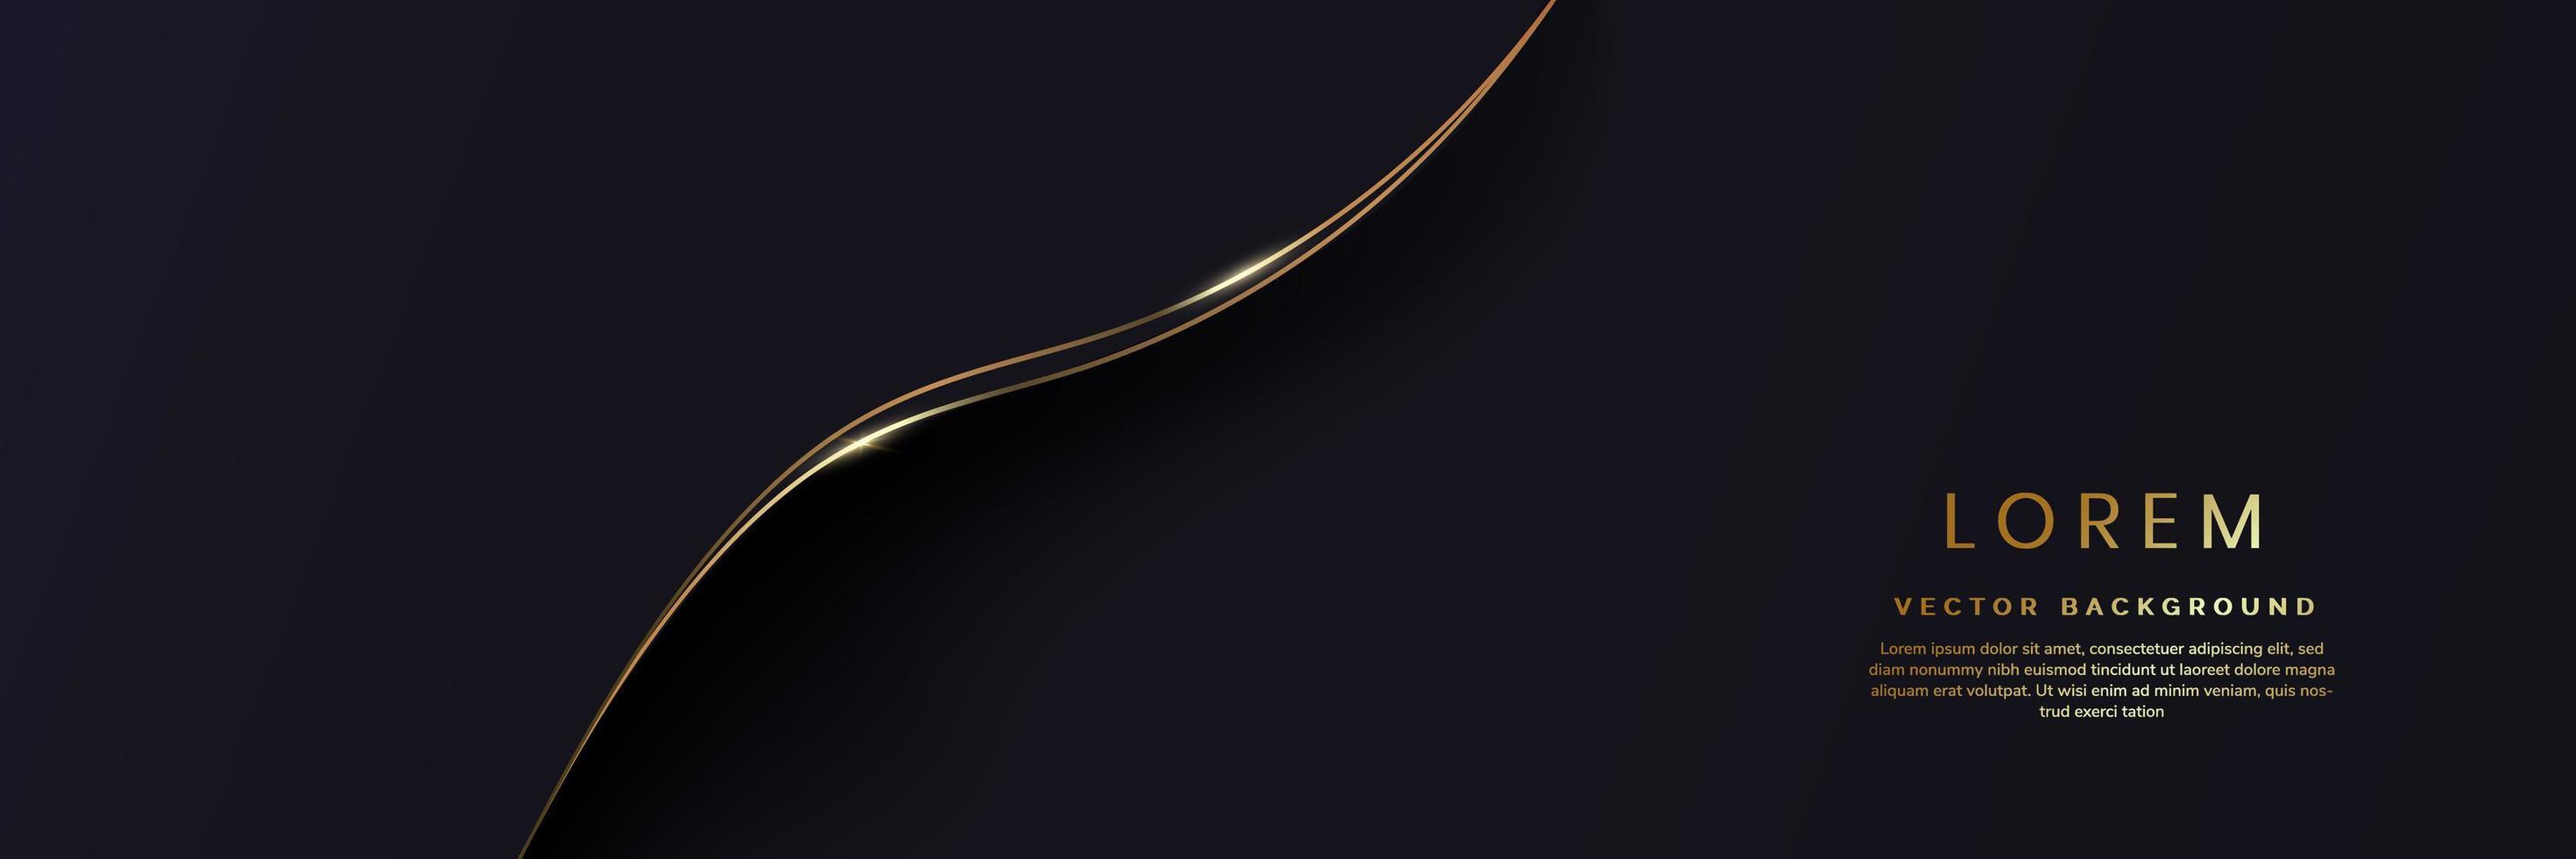 Banner abstract 3D luxury gold curved lines overlapping with light effect on dark background. vector